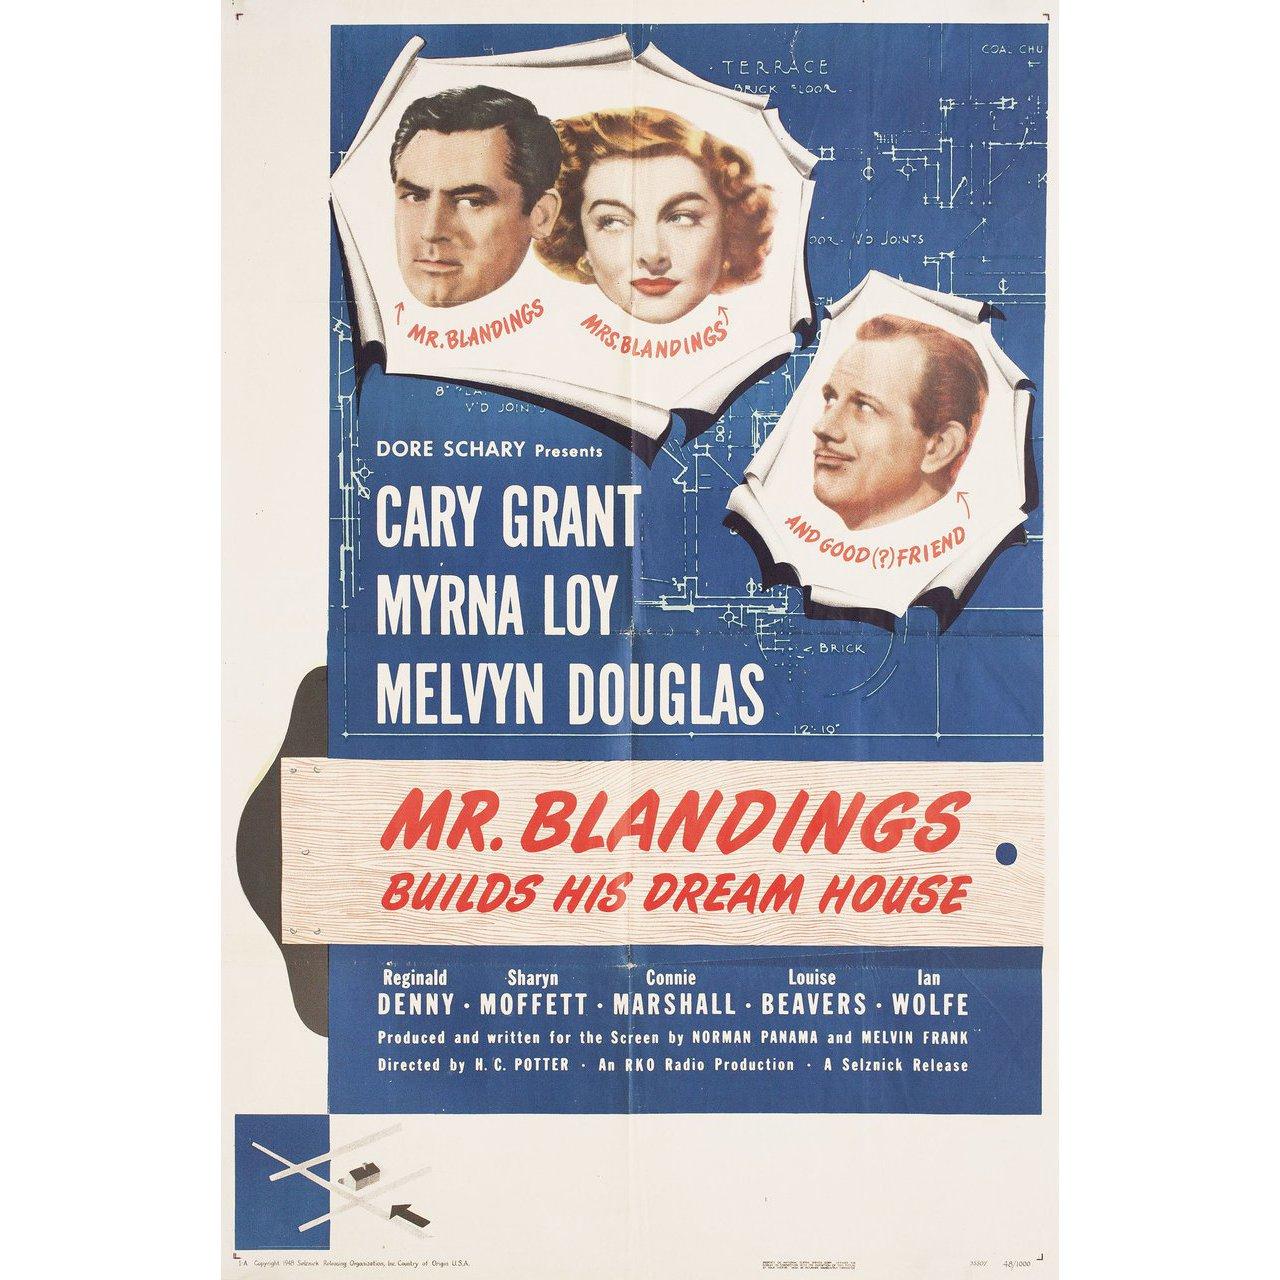 Original 1948 U.S. one sheet poster for the film Mr. Blandings Builds His Dream House directed by H.C. Potter with Cary Grant / Myrna Loy / Melvyn Douglas / Reginald Denny. Very Good condition, folded with minor fold wear. Many original posters were